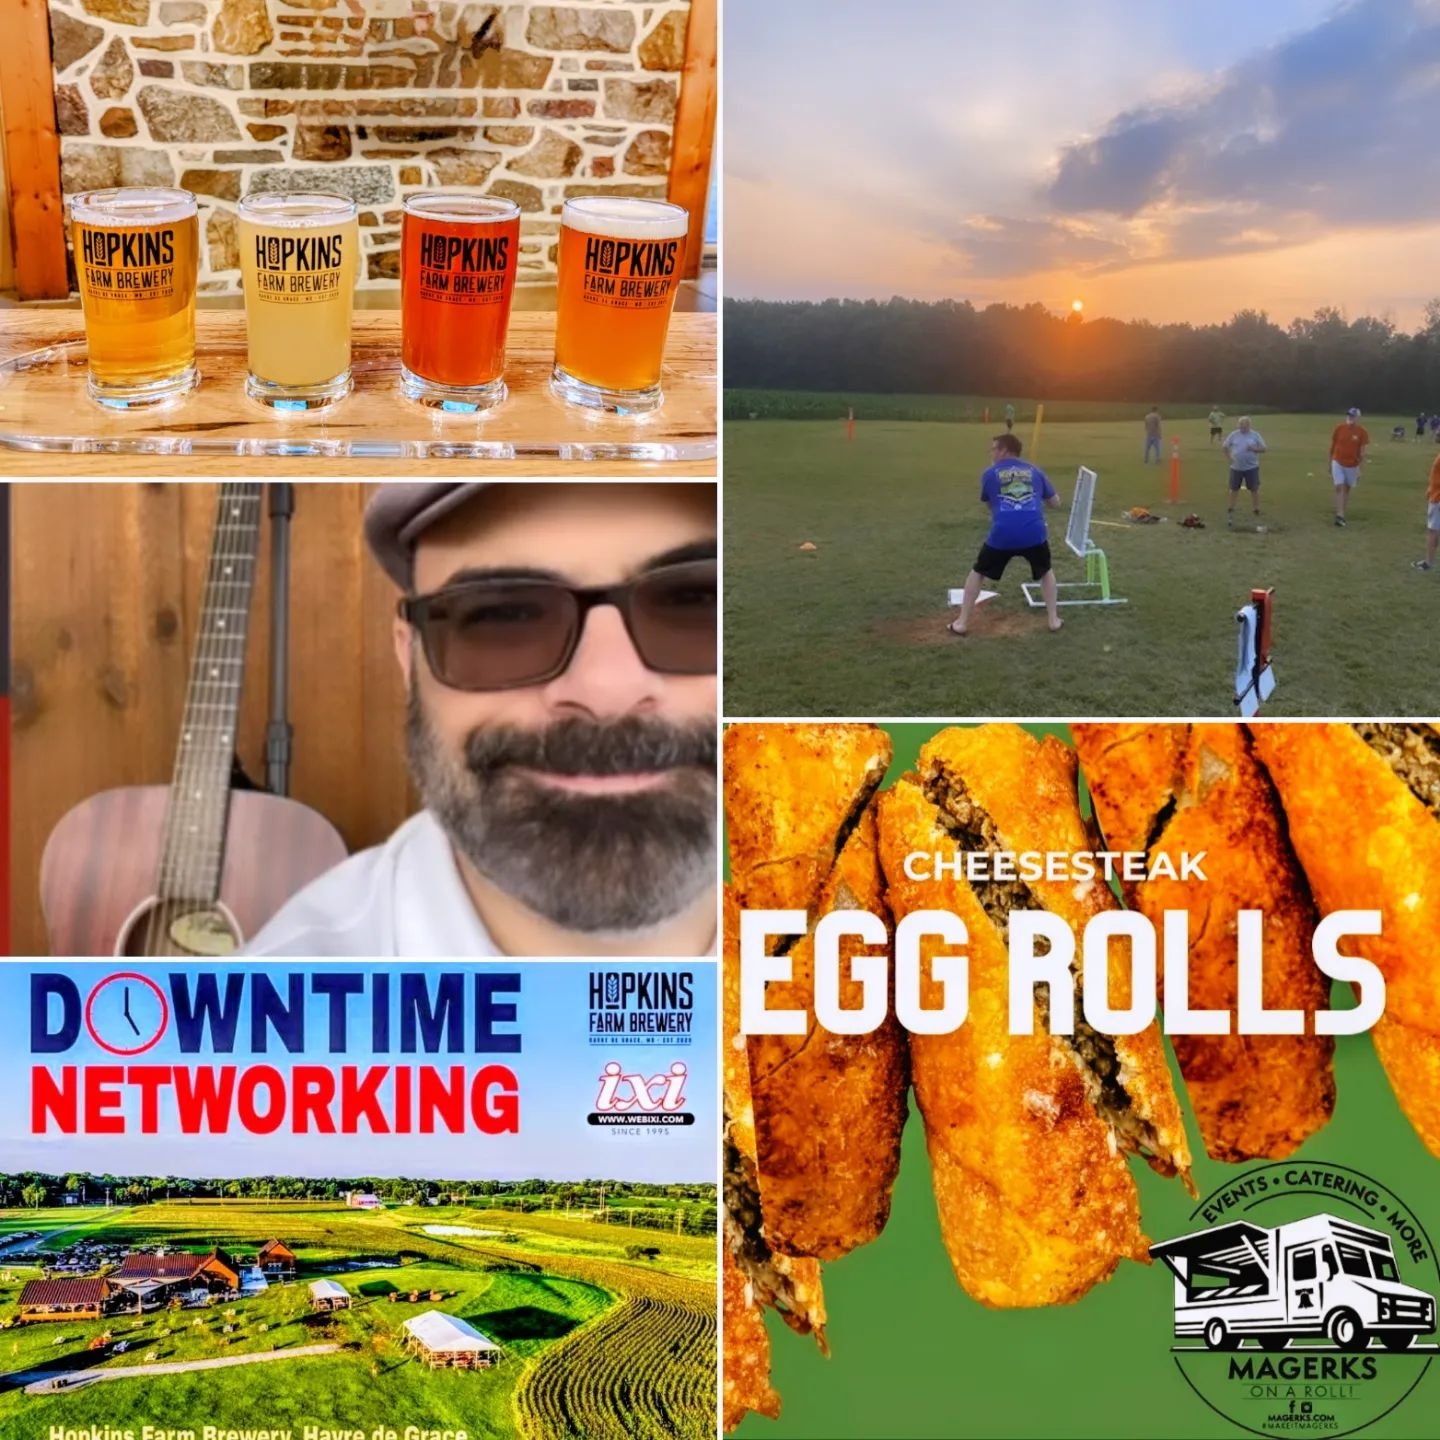 American Craft Beer Week continues today! Grab a flight for $8, cheesesteak egg rolls from magerks_on_a_roll at 4PM, enjoy @chrismontmusic at 5PM, then stay for Downtime Networking at 5PM and watch Wiffle Ball at 5:30PM!